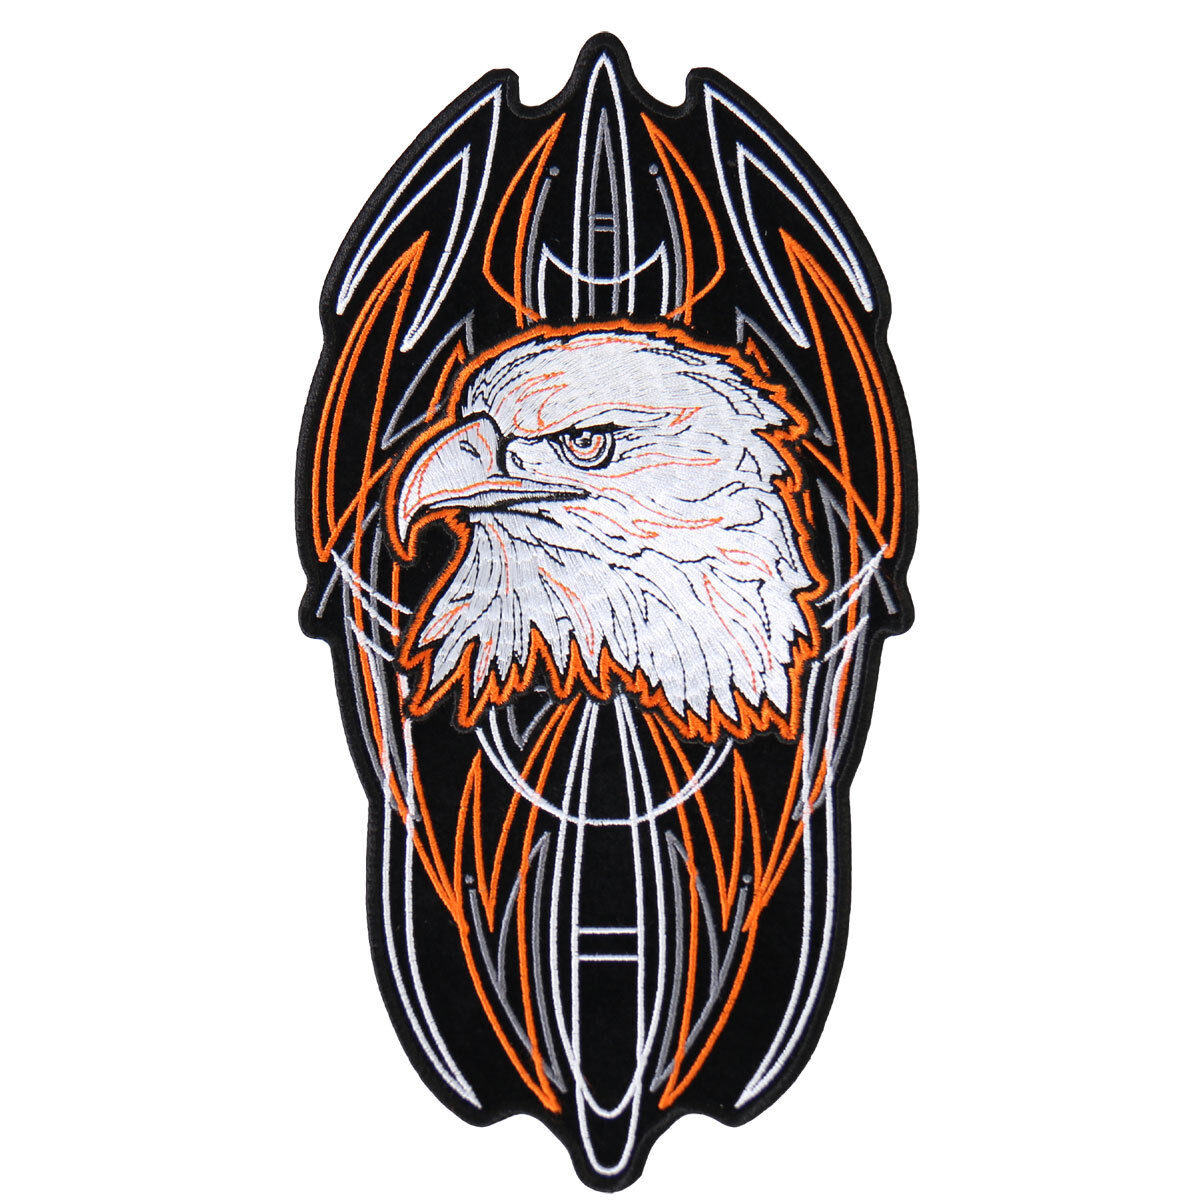 Pinstripe eagle EMBROIDERED 5*10 INCH IRON ON MC BIKER PATCH